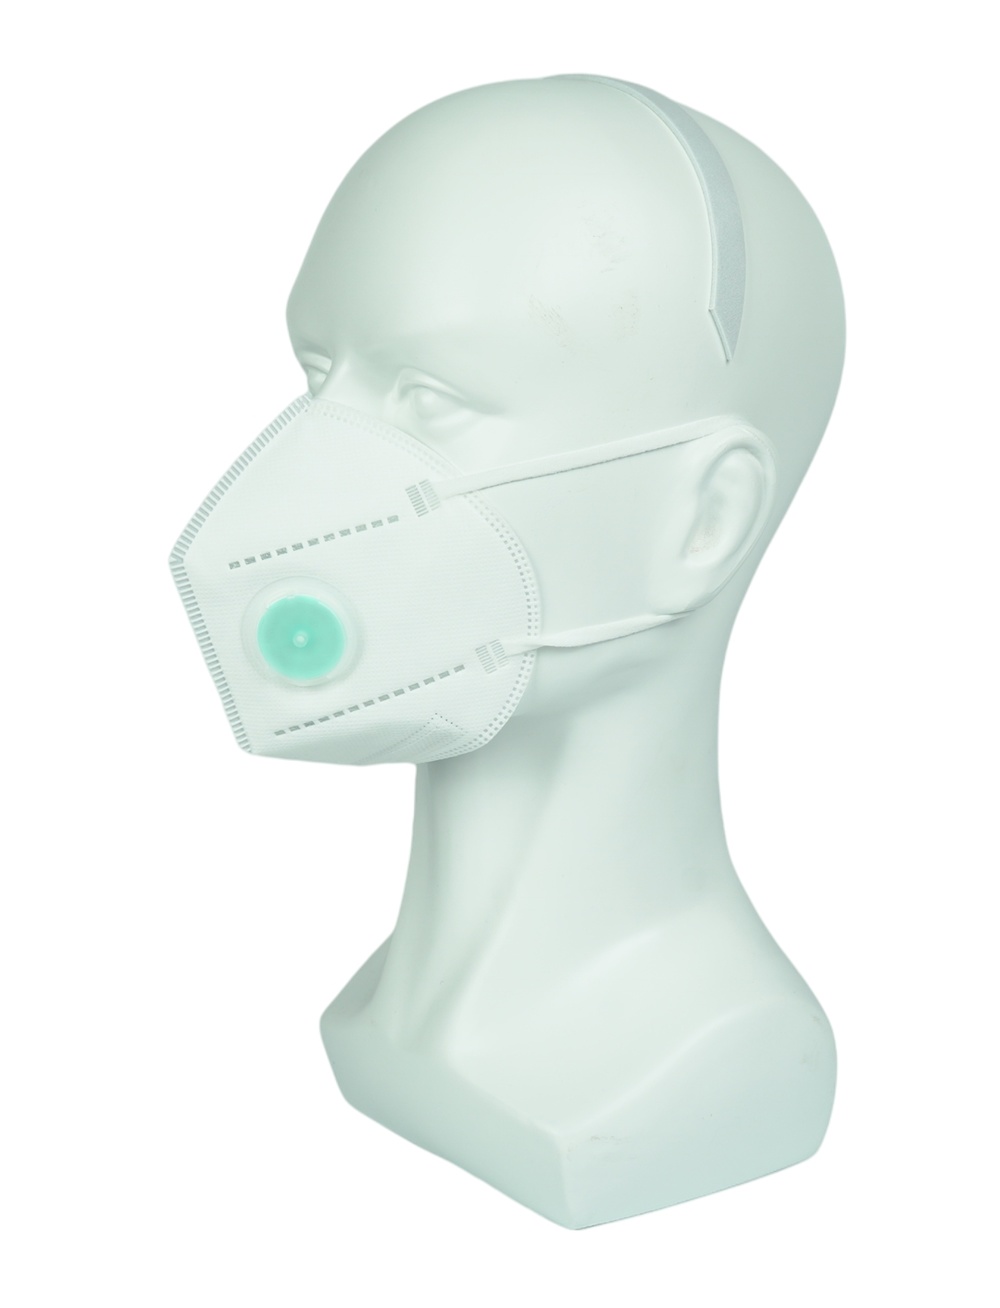 KN95 non-medical protective mask with valve